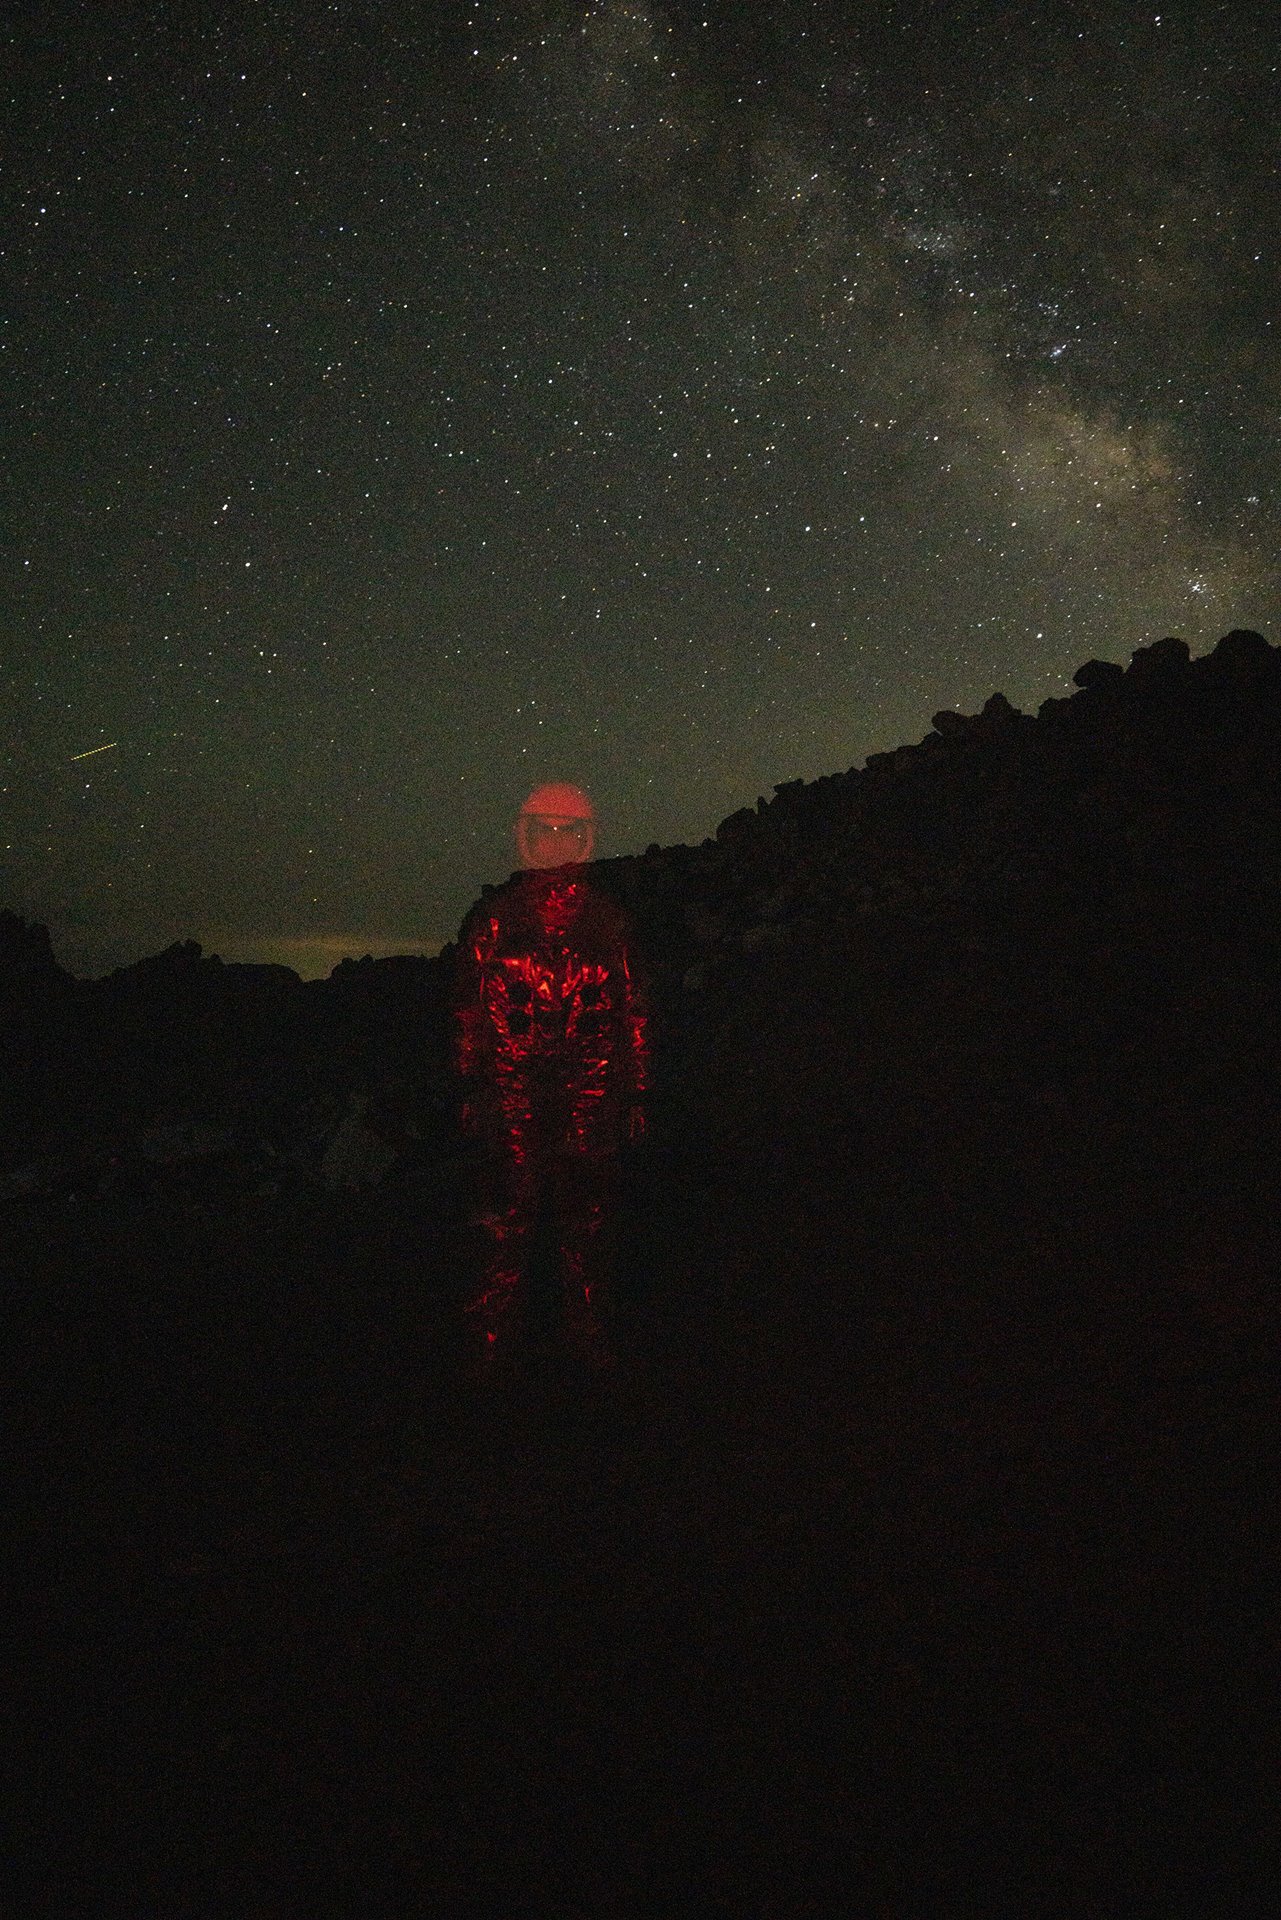 An astronaut from the fictional Gay Space Agency. Staged photograph taken at Obsidian Dome in Mono County, California, United States.&nbsp;